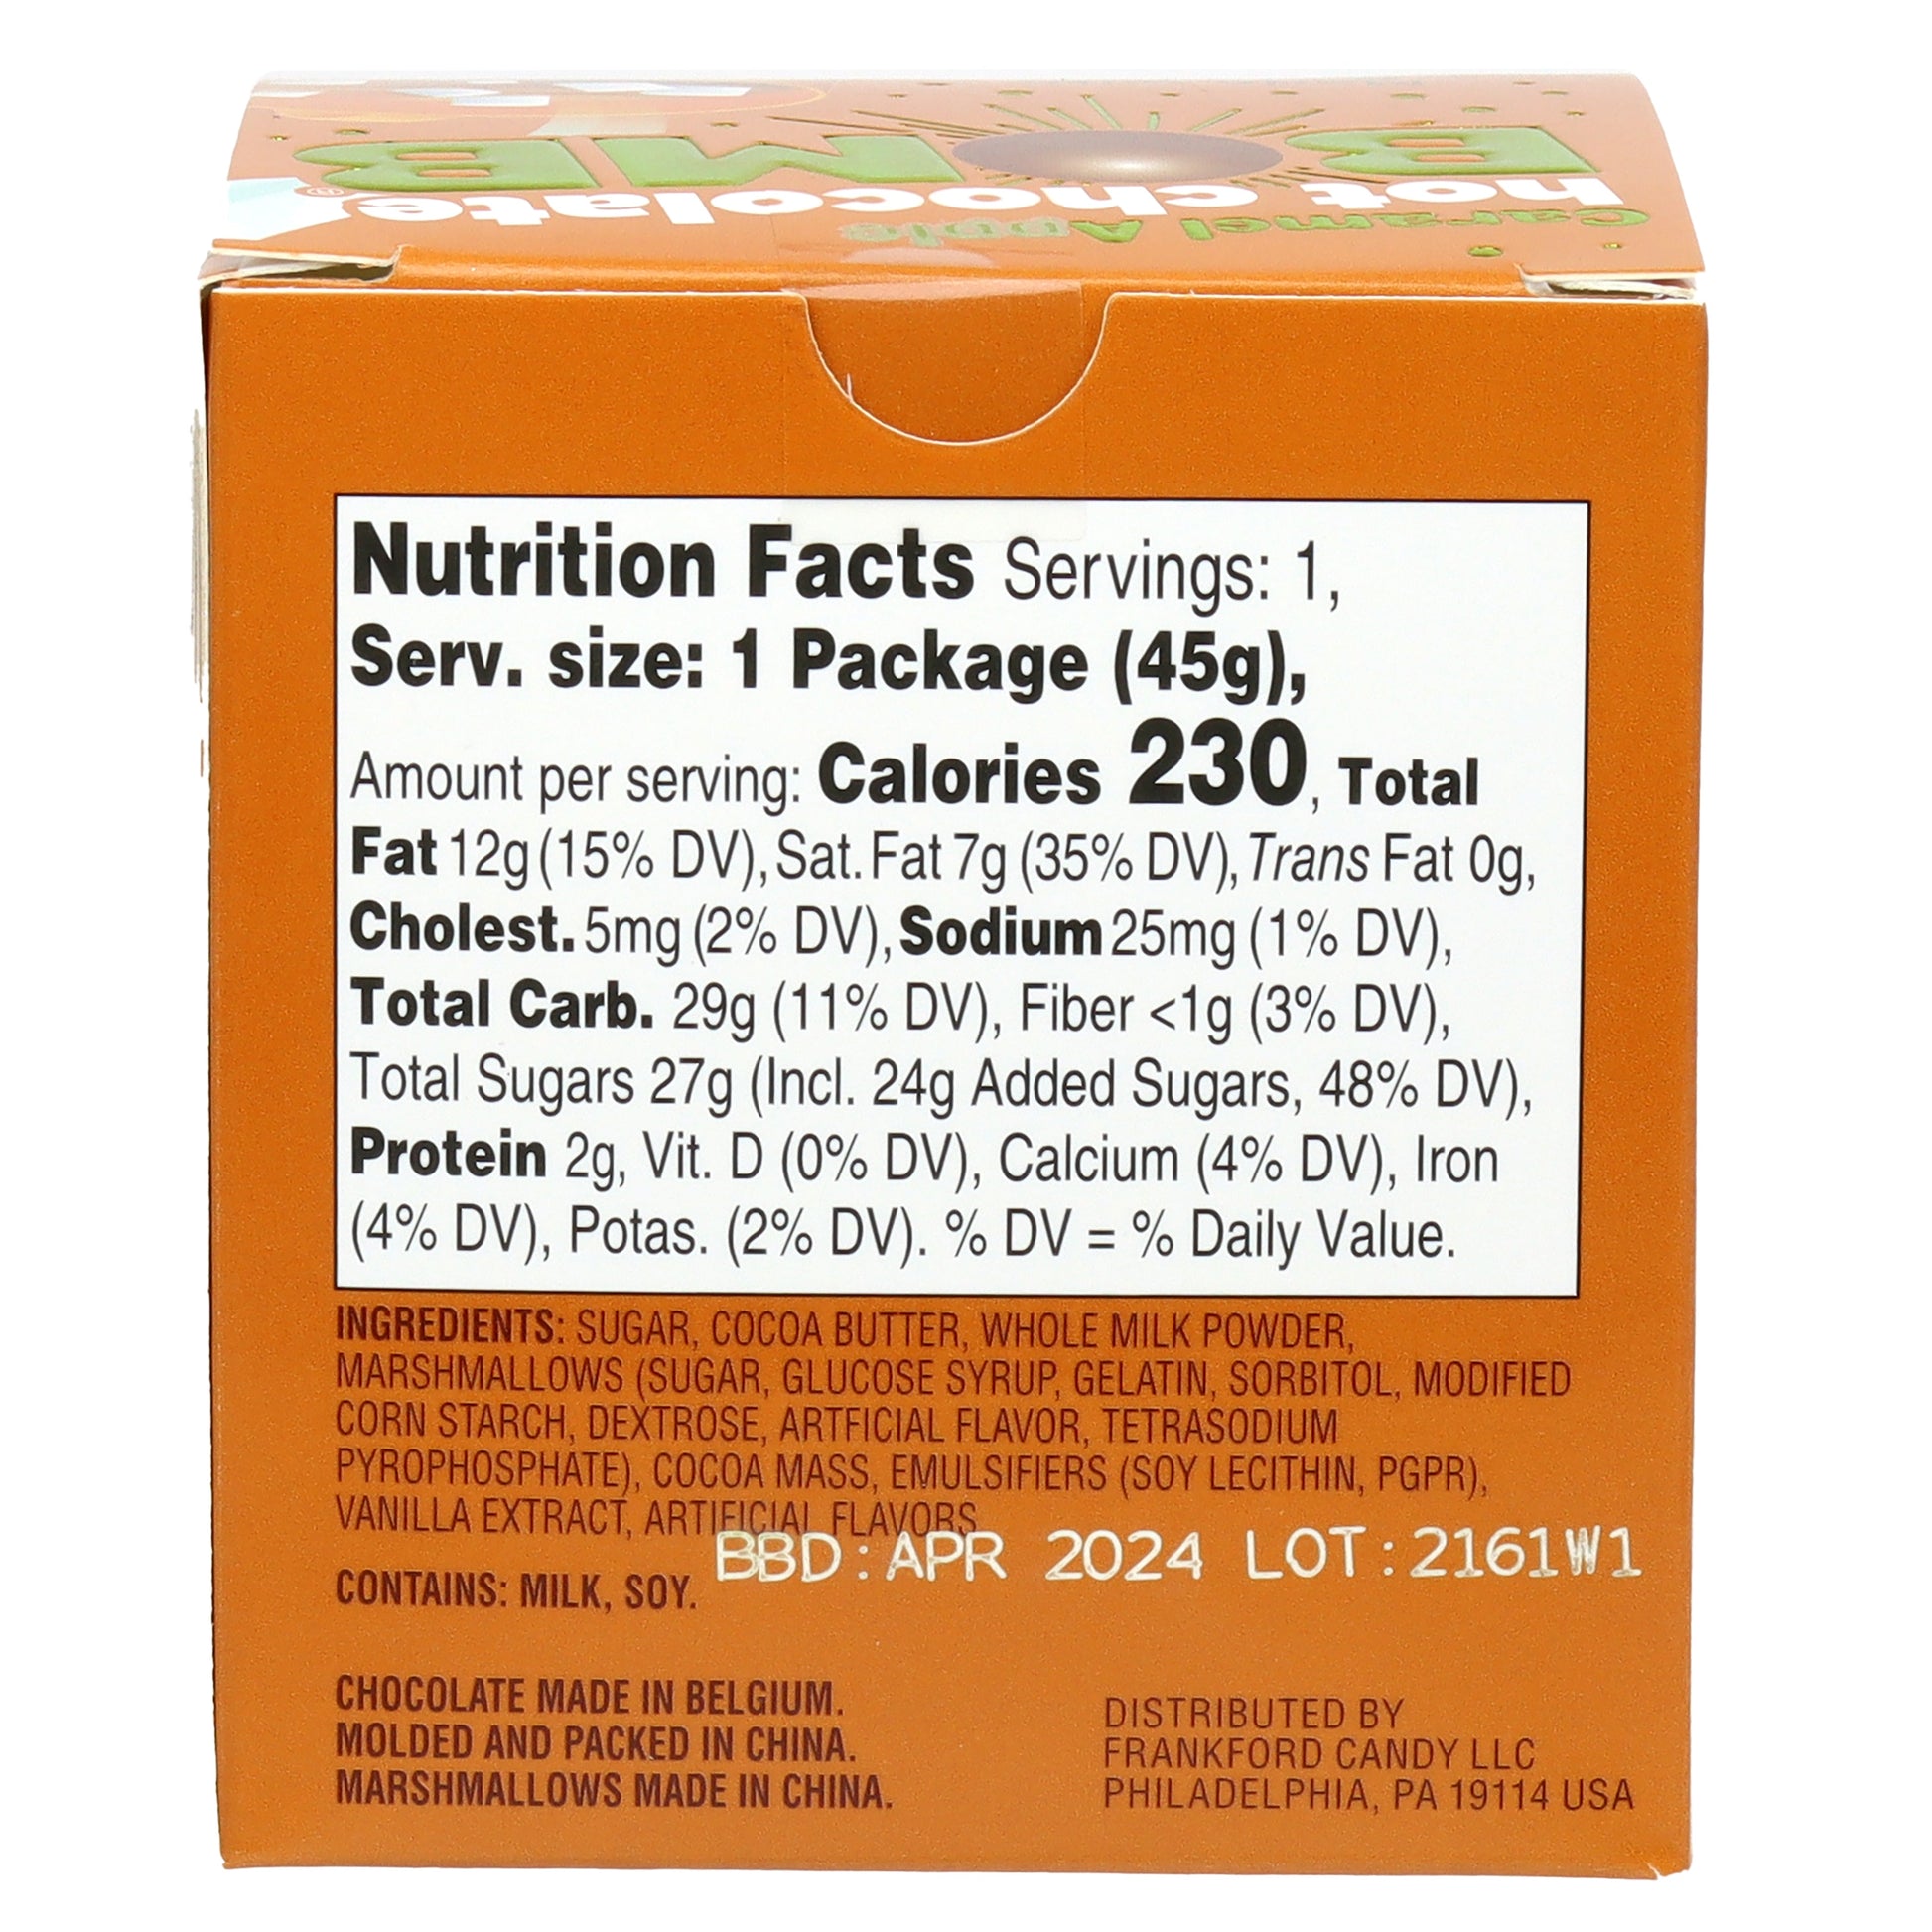 Back of orange box with nutrition facts and ingredients